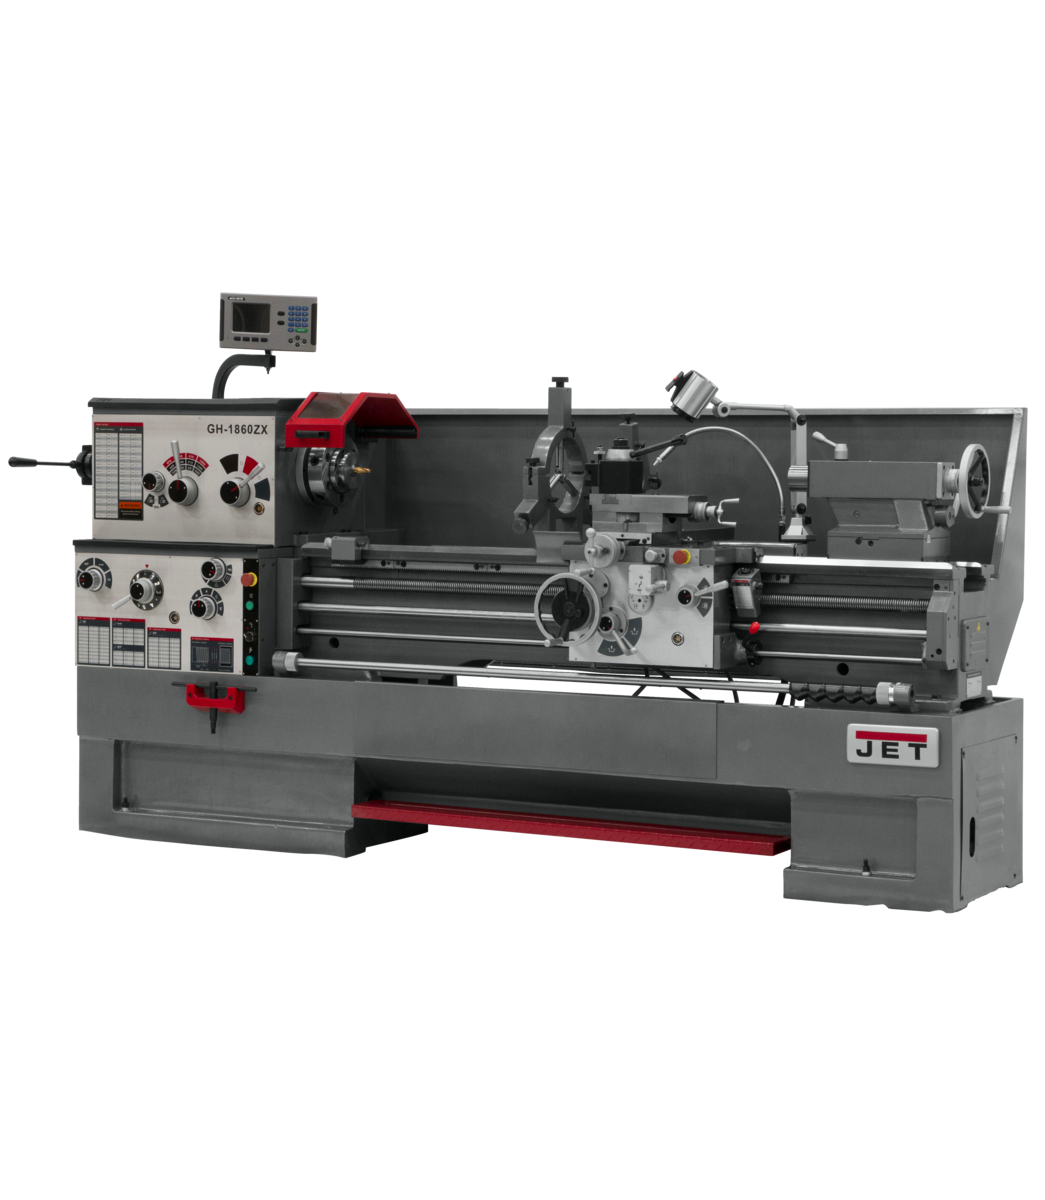 321960, GH-1860ZX, GH-1860ZX, 18" Swing 60" Centers, D1-8 Camlock Spindle, 7-1/2HP, 3Ph, 230/460V, Jet, Metalworking, Turning, Lathes